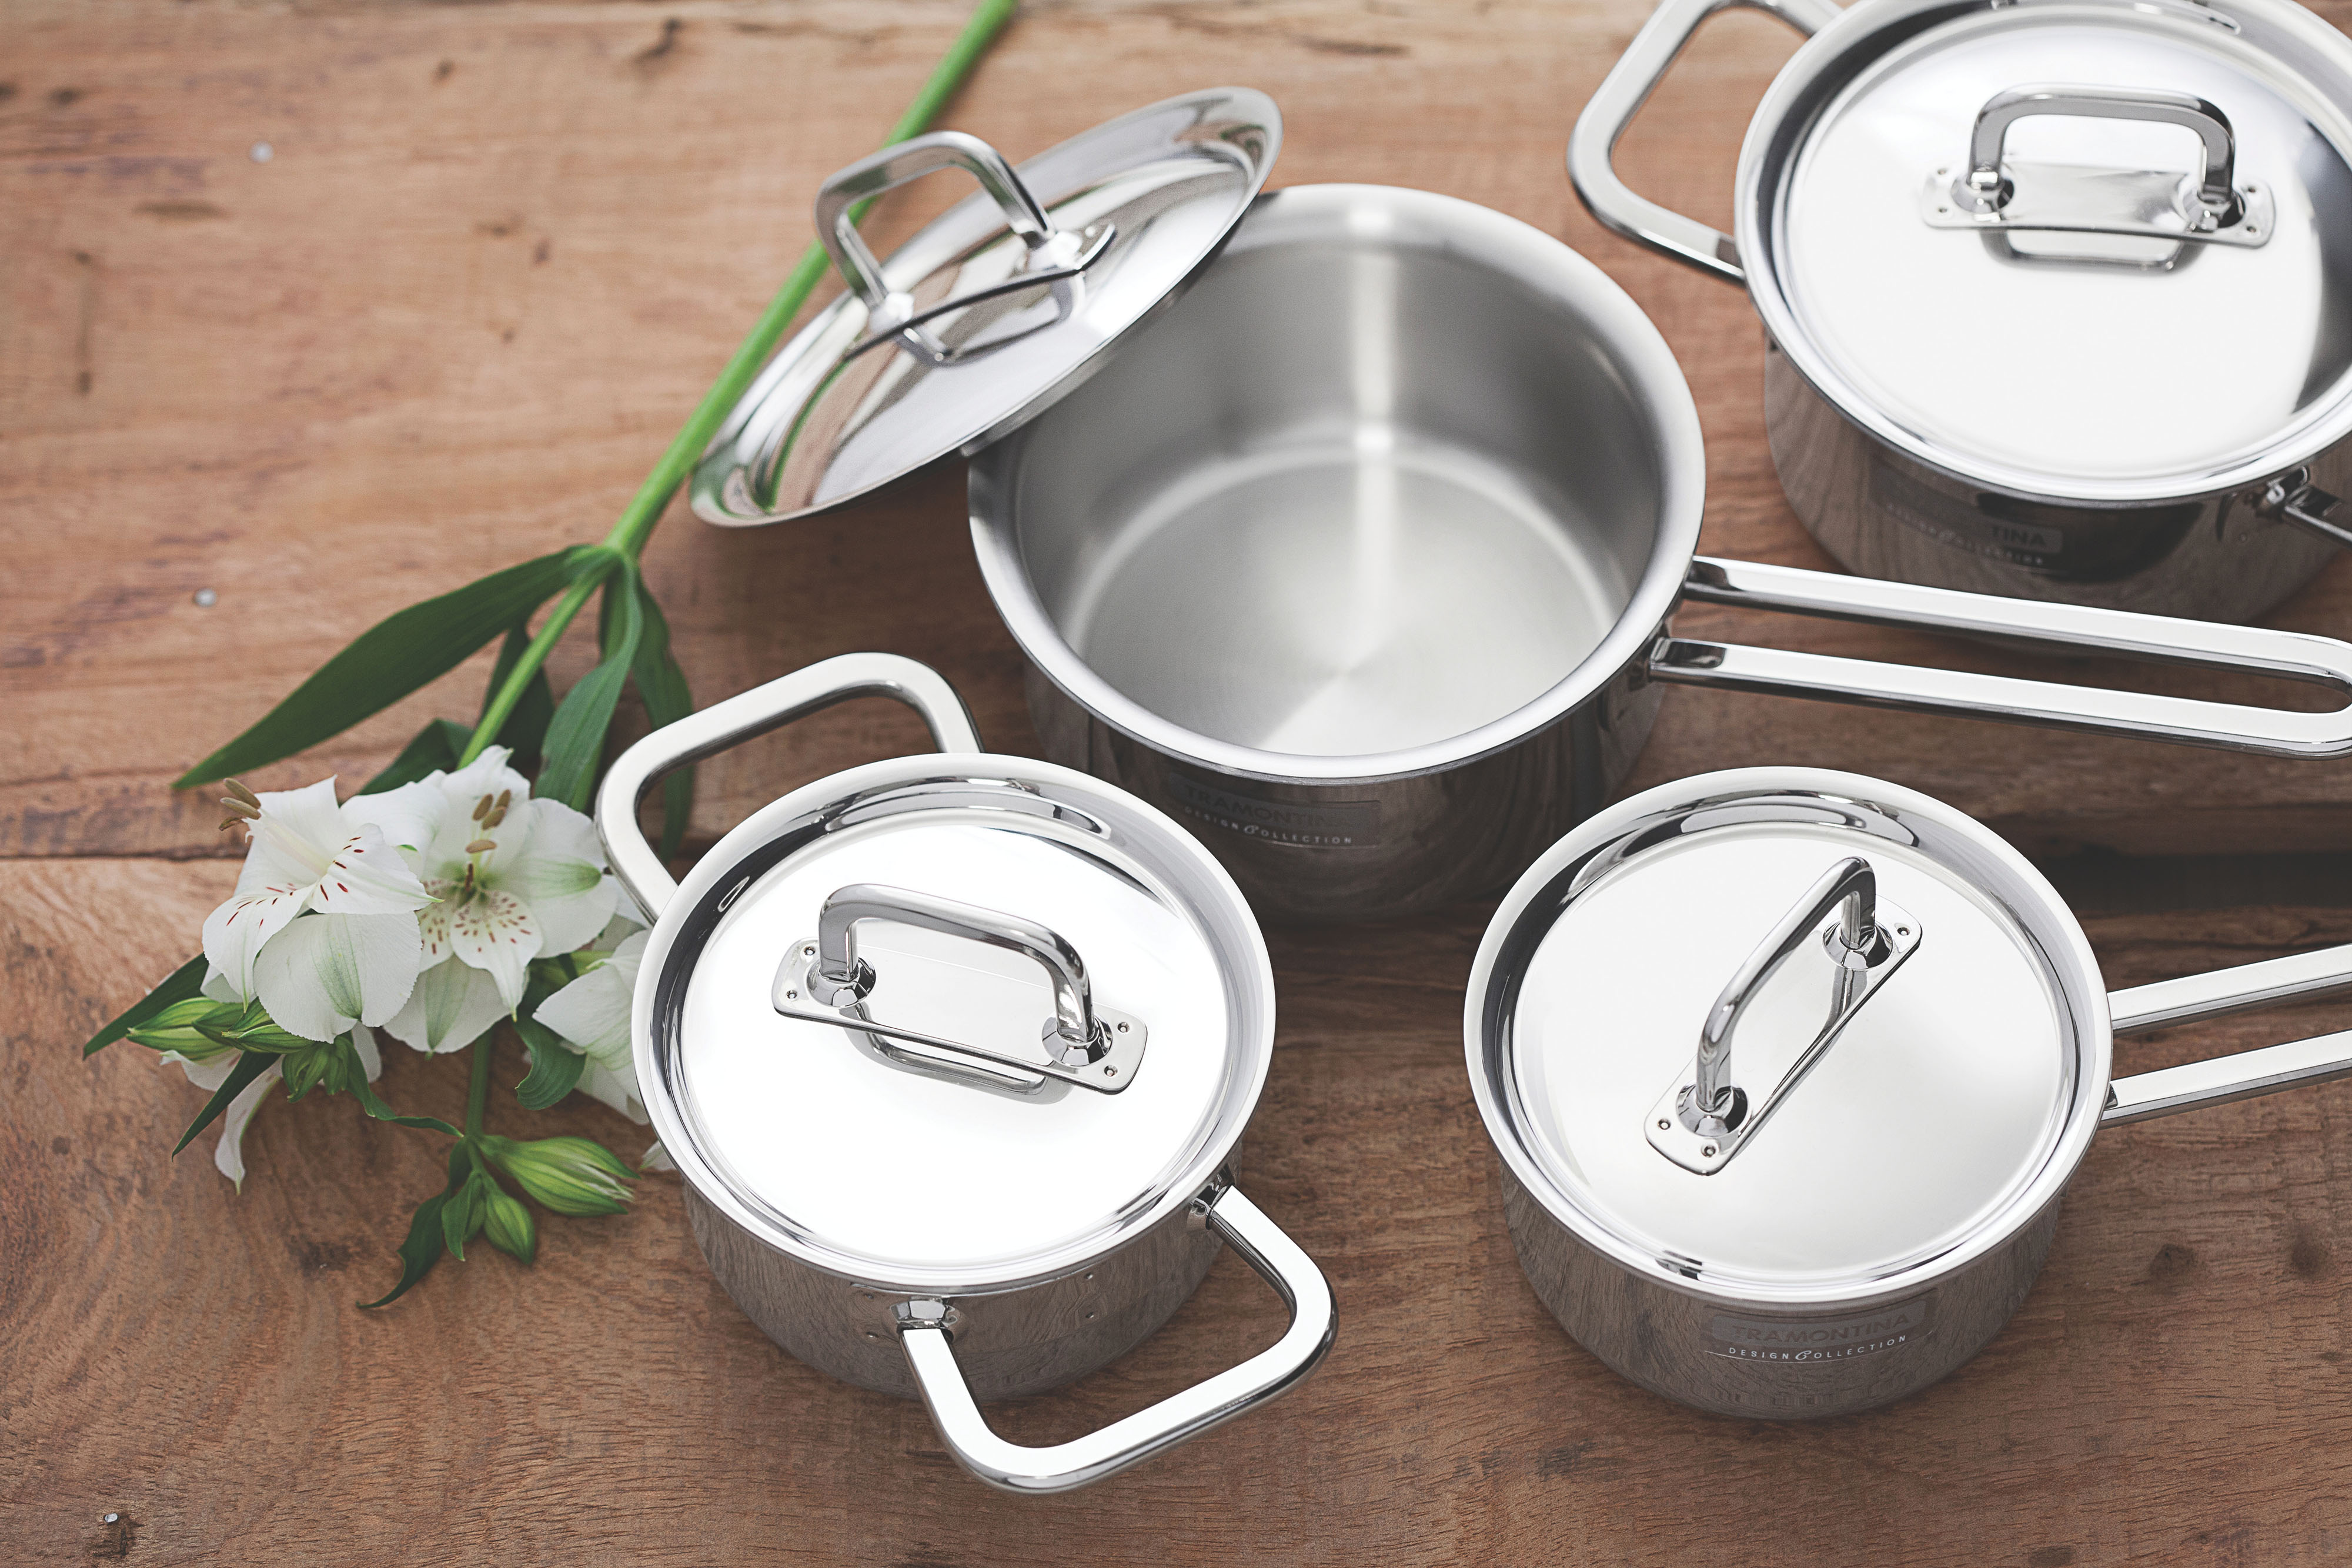 Tramontina Stainless Steel (18/10) 14 Pc Cookware Set & Reviews